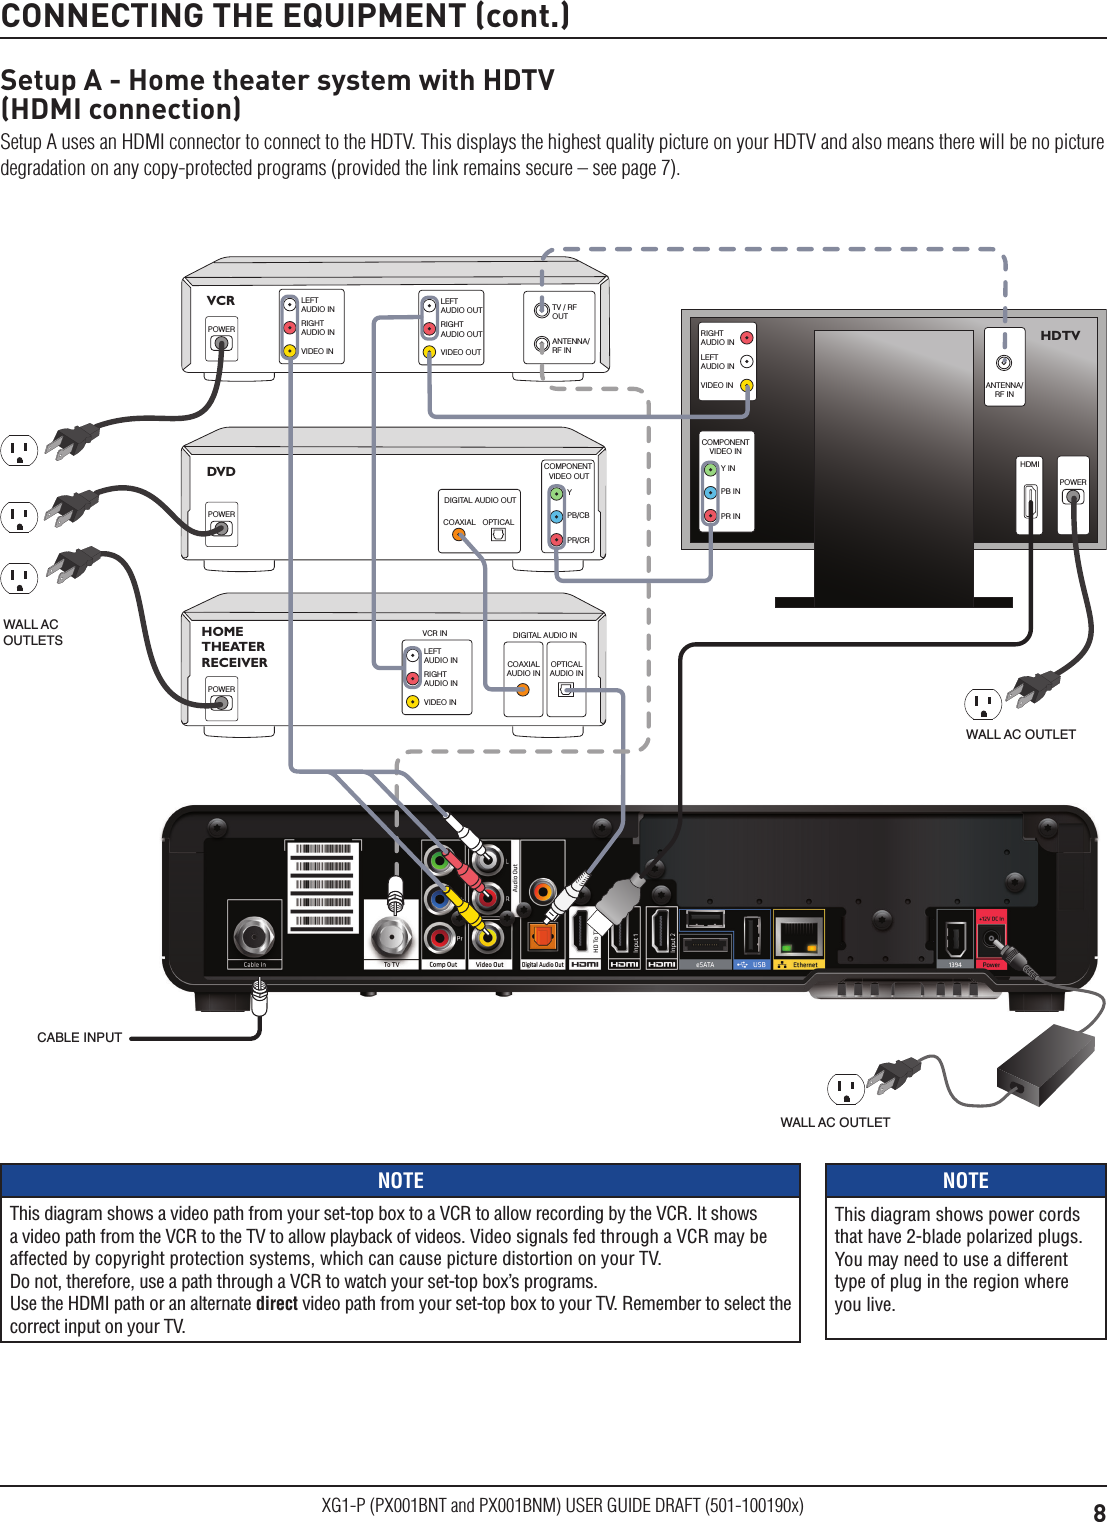 8XG1-P (PX001BNT and PX001BNM) USER GUIDE DRAFT (501-100190x)CONNECTING THE EQUIPMENT (cont.)Setup A - Home theater system with HDTV  (HDMI connection)Setup A uses an HDMI connector to connect to the HDTV. This displays the highest quality picture on your HDTV and also means there will be no picture degradation on any copy-protected programs (provided the link remains secure – see page 7).VCRDVDPB/CBPR/CRYCOMPONENT VIDEO OUTDIGITAL AUDIO OUTOPTICALCOAXIALANTENNA/RF INTV / RF OUTLEFTAUDIO OUTRIGHTAUDIO OUTVIDEO OUTLEFTAUDIO INRIGHTAUDIO INVIDEO INOPTICALAUDIO INCOAXIALAUDIO INDIGITAL AUDIO INHOME THEATER RECEIVERLEFTAUDIO INVCR INRIGHTAUDIO INVIDEO INANTENNA/RF INHDMIPB INPR INY INCOMPONENTVIDEO INLEFTAUDIO INRIGHTAUDIO INVIDEO INHDTVPOWERPOWERPOWERPOWERWALL AC OUTLETWALL AC OUTLETWALL ACOUTLETSCABLE INPUTNOTEThis diagram shows a video path from your set-top box to a VCR to allow recording by the VCR. It shows a video path from the VCR to the TV to allow playback of videos. Video signals fed through a VCR may be affected by copyright protection systems, which can cause picture distortion on your TV.   Do not, therefore, use a path through a VCR to watch your set-top box’s programs.  Use the HDMI path or an alternate direct video path from your set-top box to your TV. Remember to select the correct input on your TV.NOTEThis diagram shows power cords that have 2-blade polarized plugs. You may need to use a different type of plug in the region where you live.